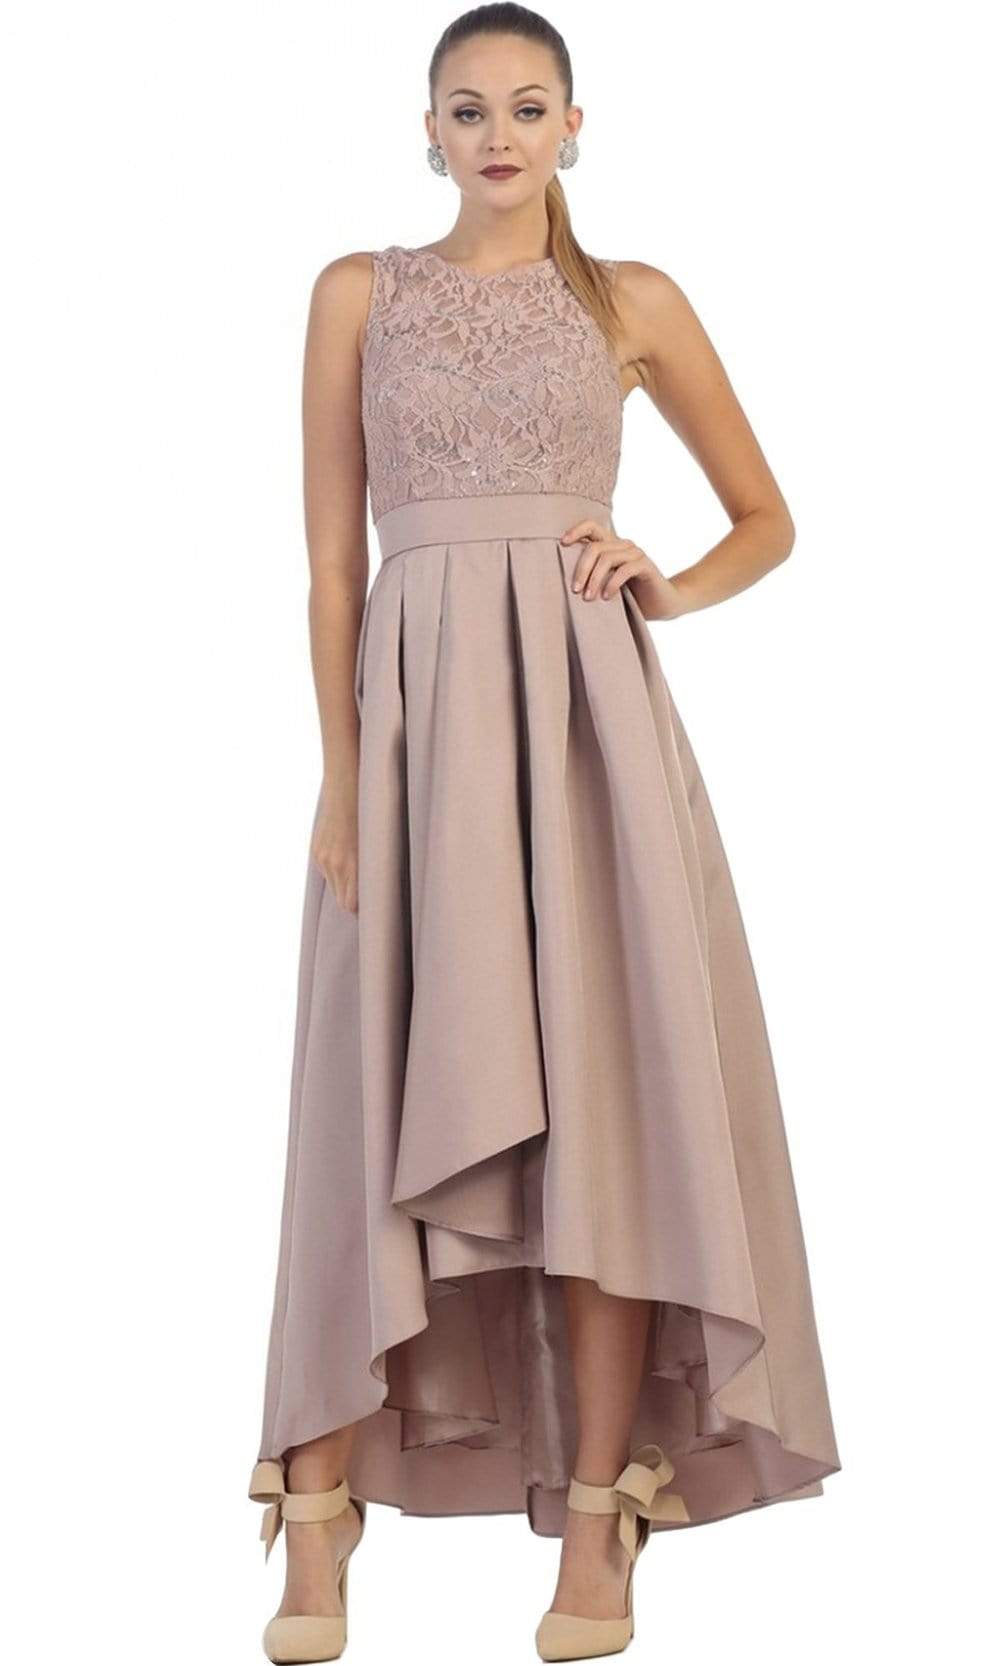 May Queen - High Low Illusion Jewel A-line Evening Dress Special Occasion Dress 4 / Mocha